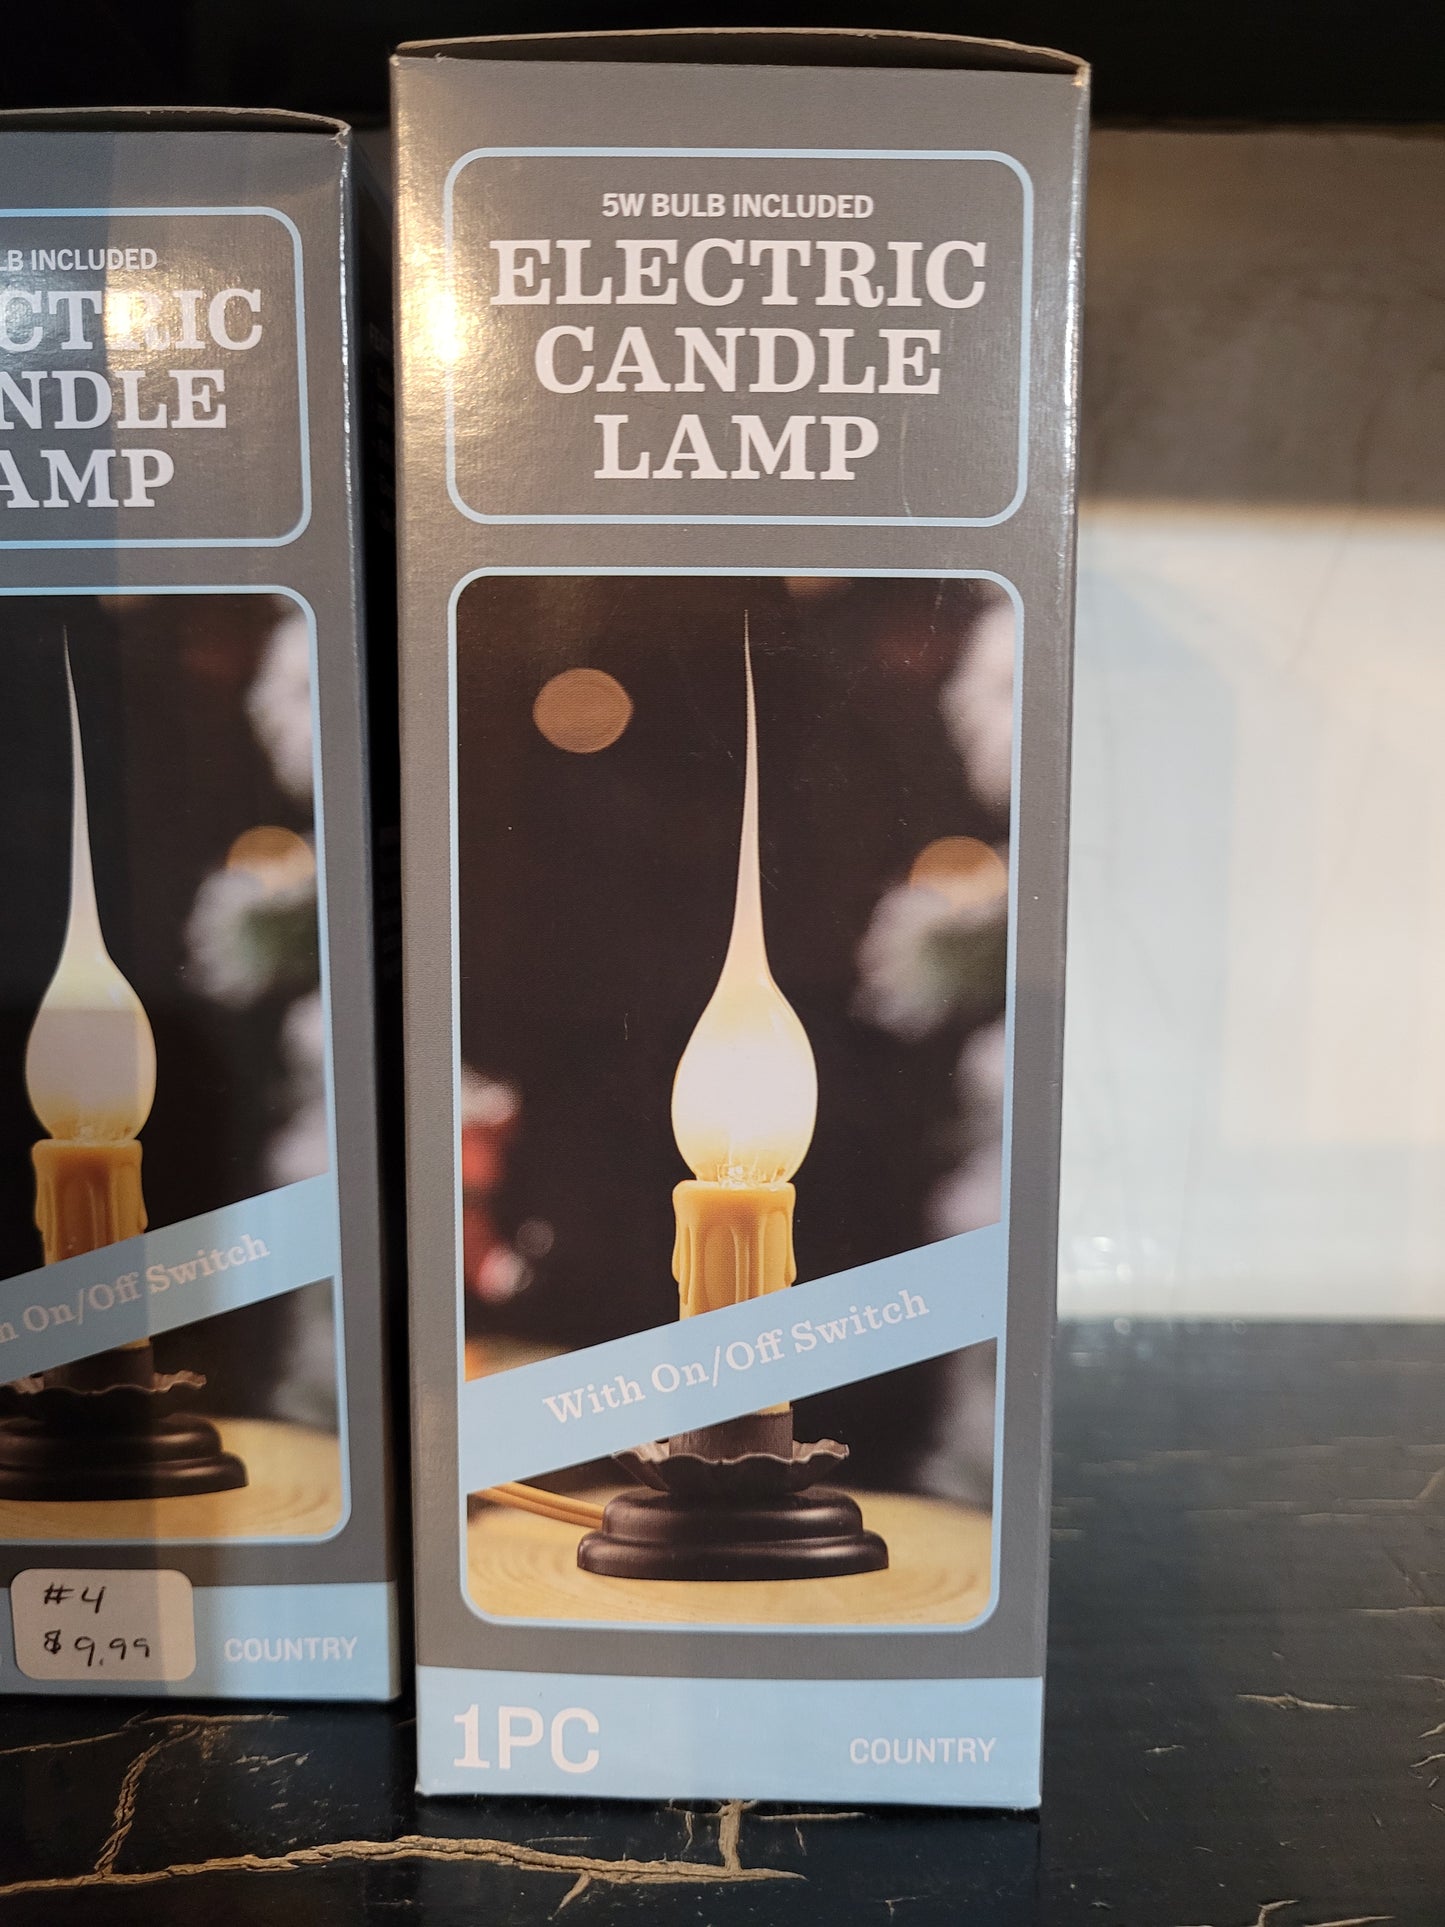 Electric candle lamp